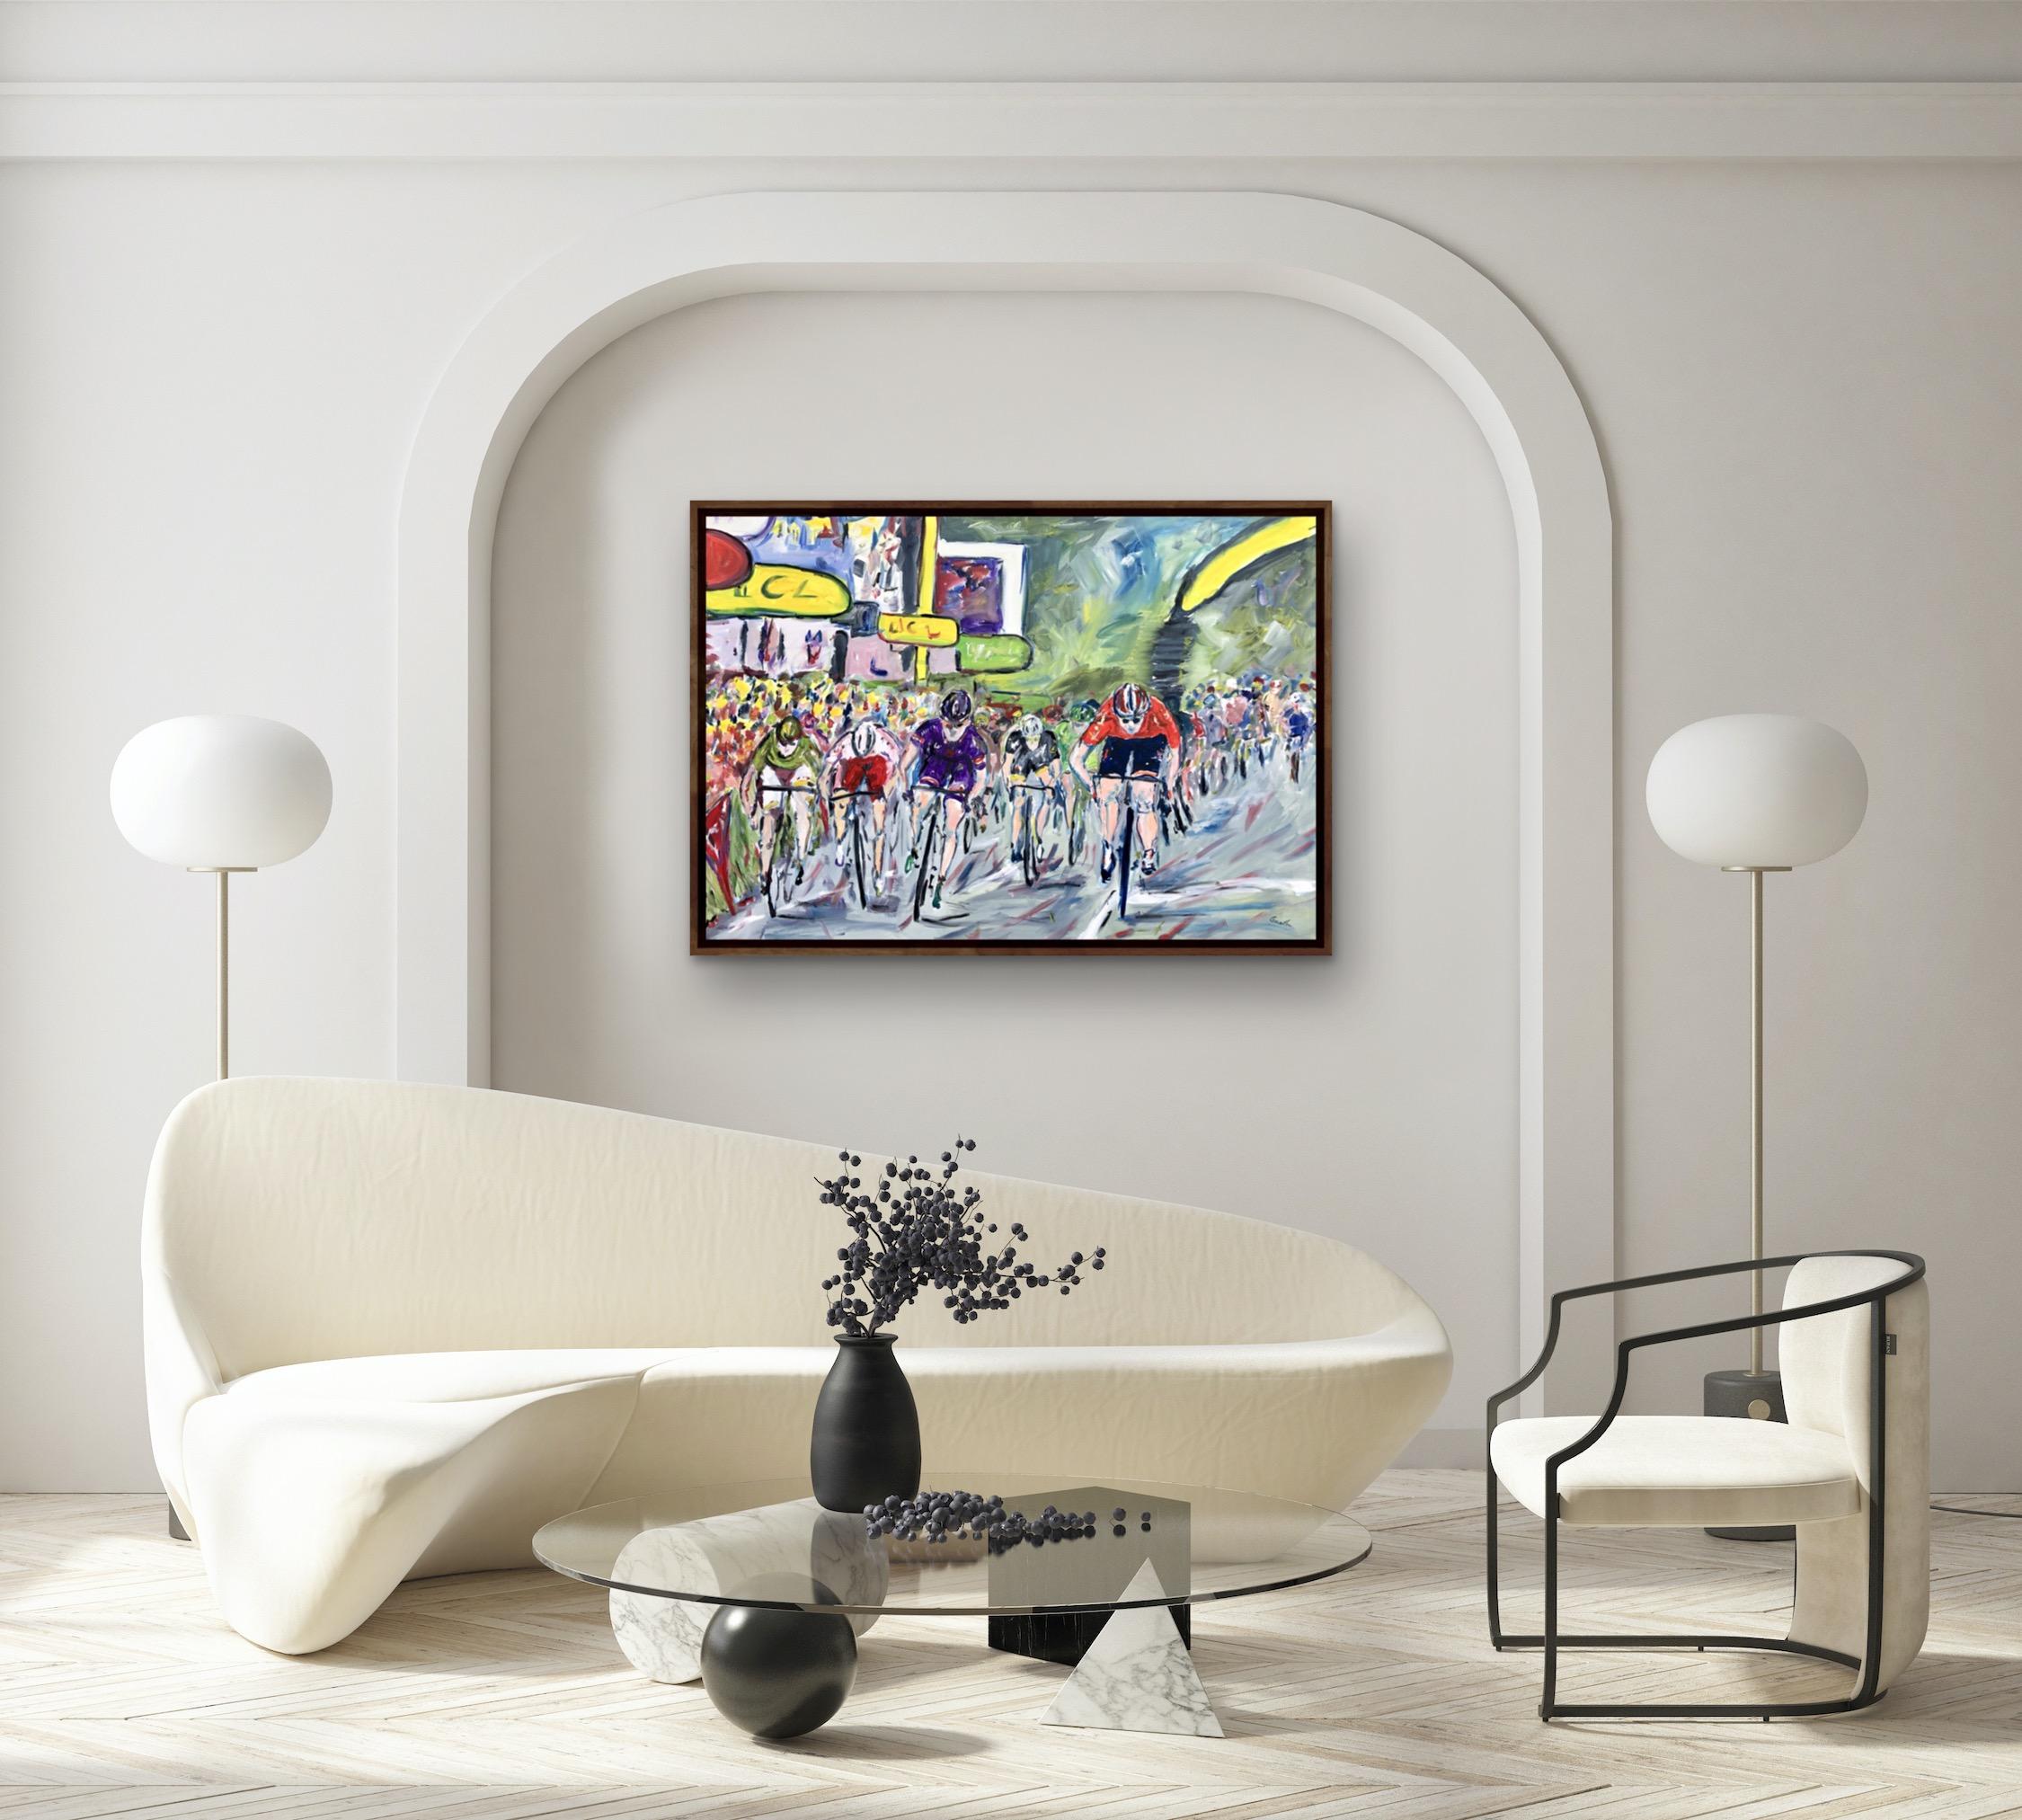 The Final Sprint- Tour de France Stage 15 2015 is an original painting by Garth Bayley cycling artwork, sportive, Tour de France,
This Painting was worked from a sketch. I created a sketch a day for the Tour of France and this just had the energy